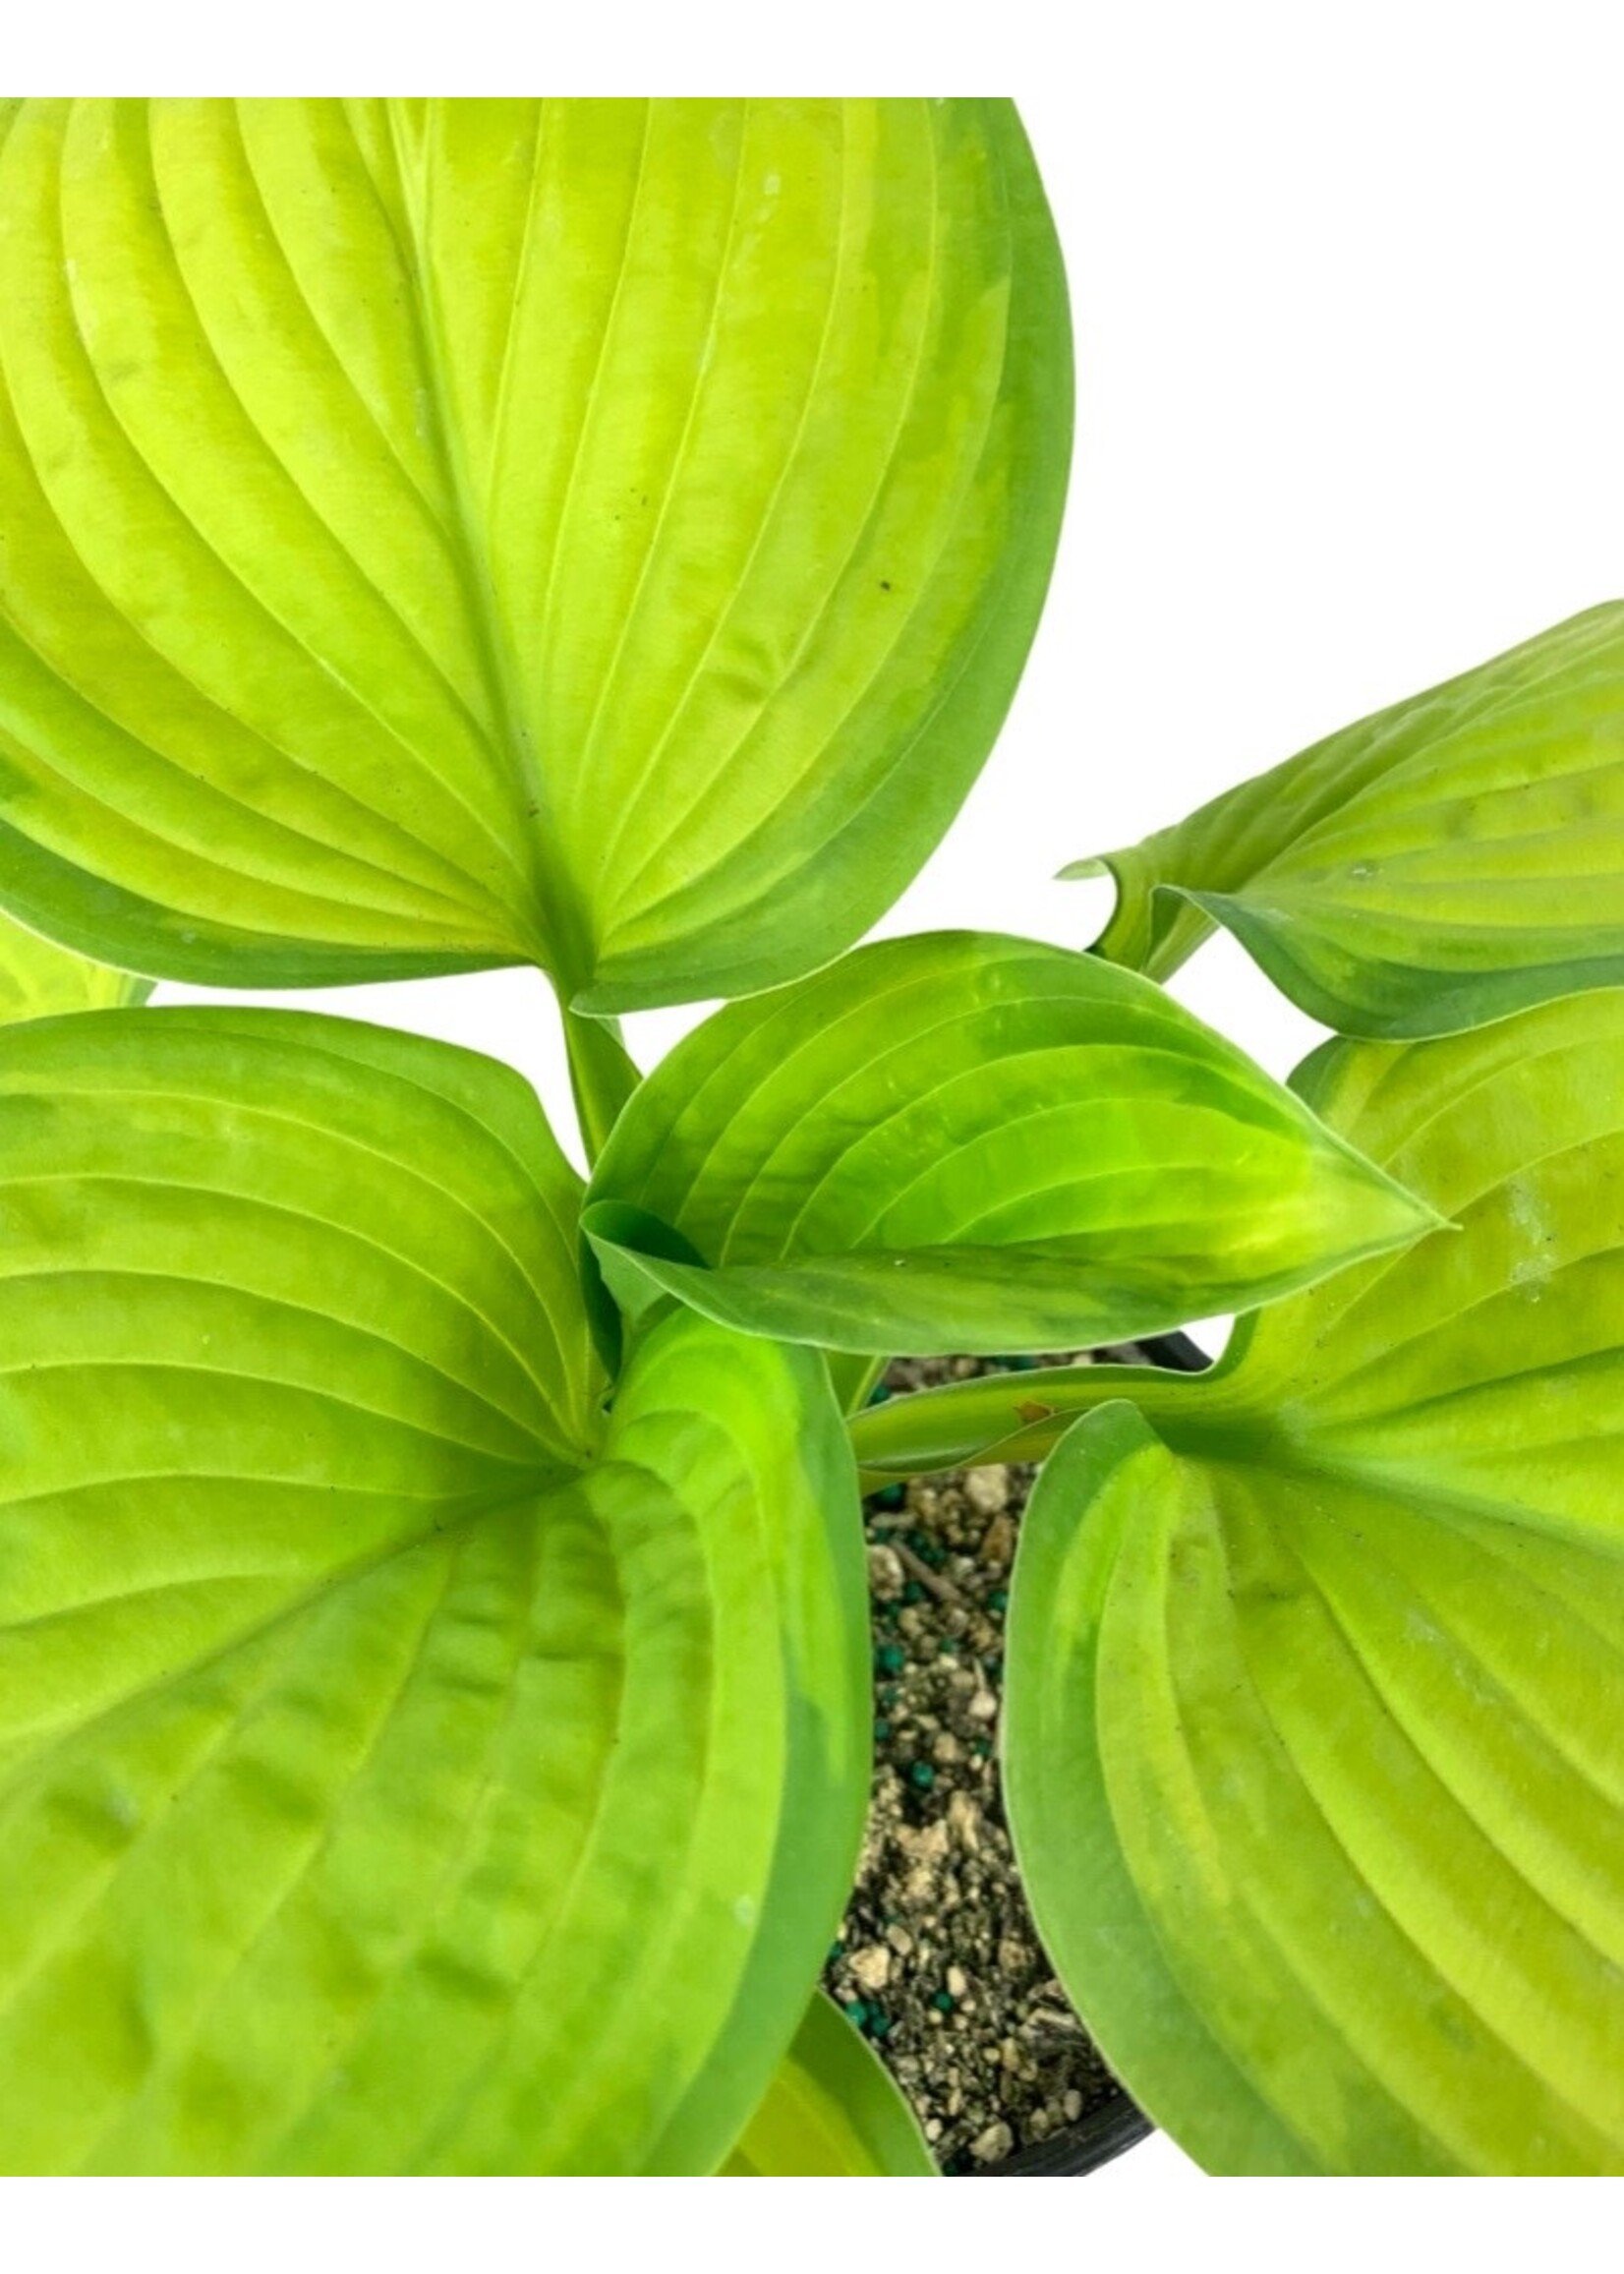 Hosta 'Stained Glass' 1 Gallon